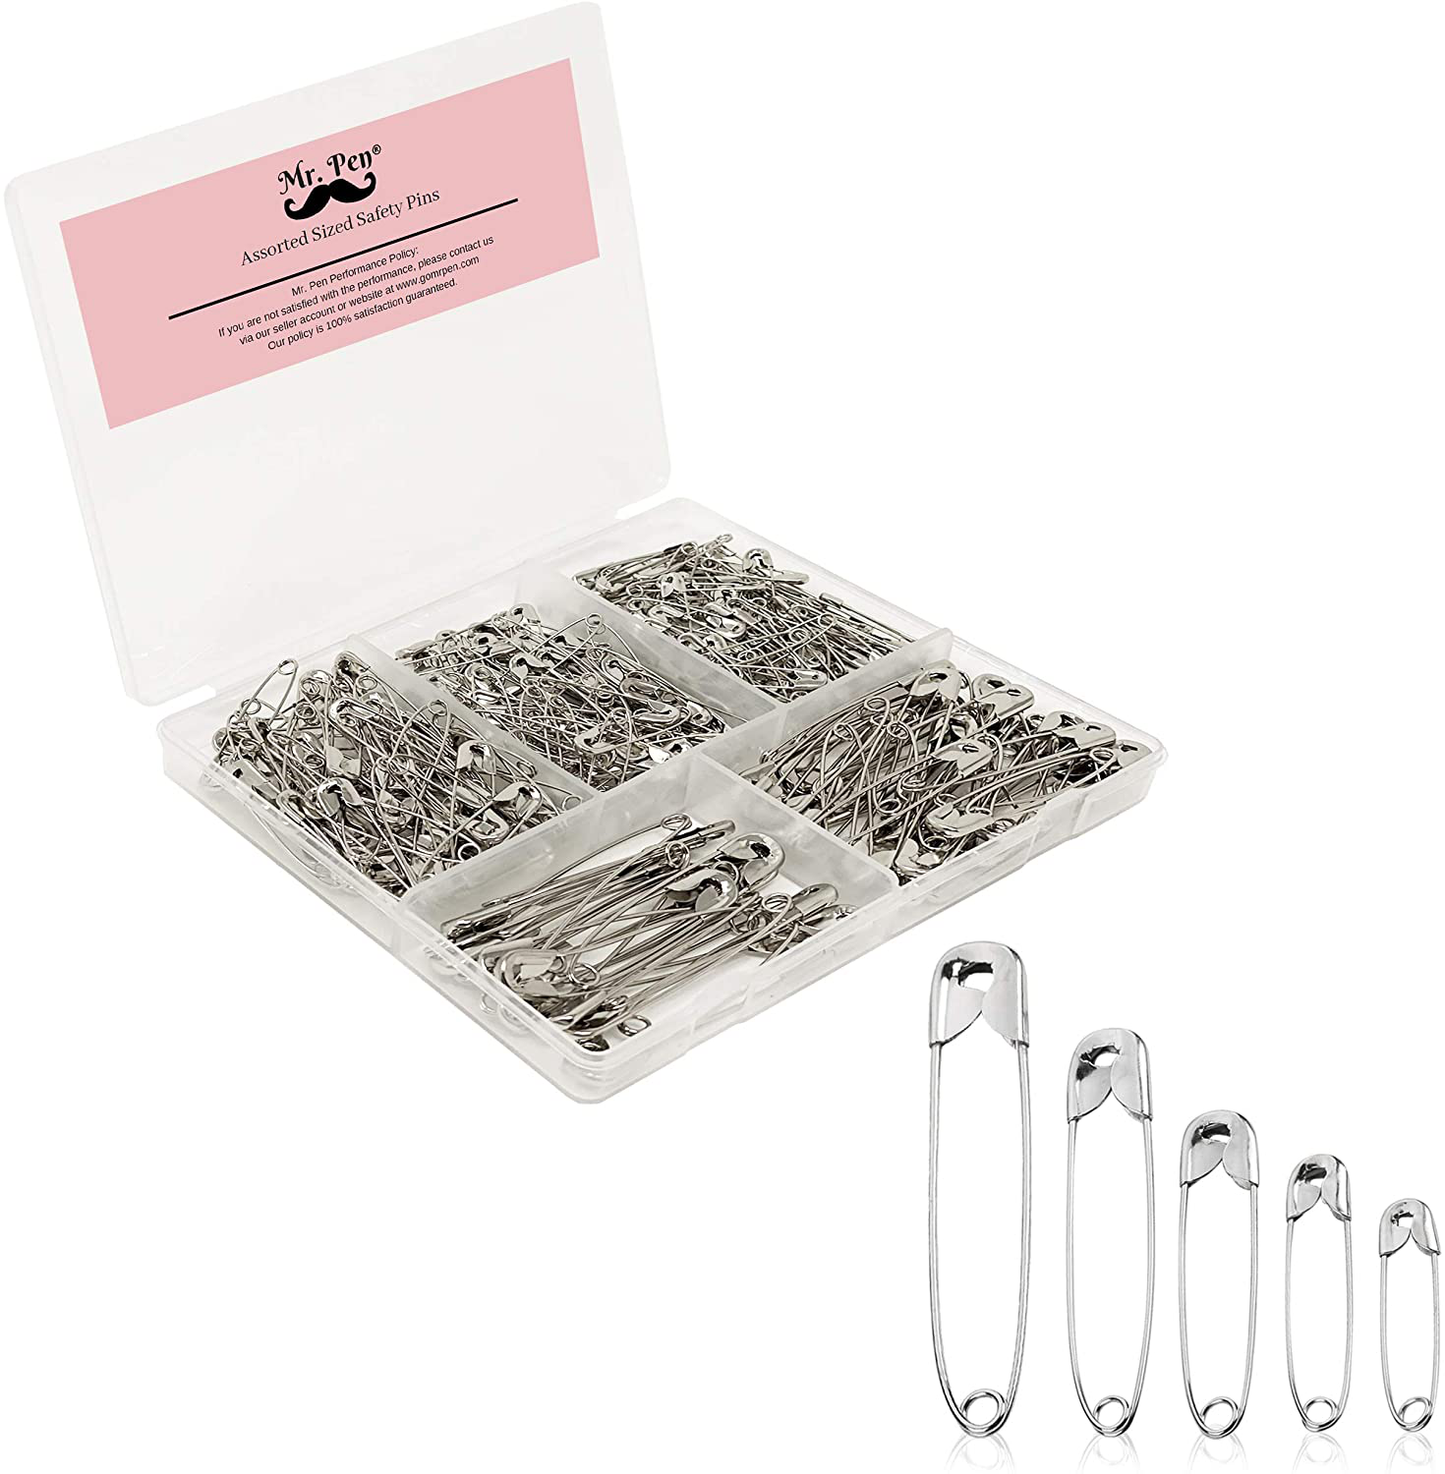 Mr. Pen- Safety Pins, Safety Pins Assorted, 300 Pack, Assorted Safety Pins, Safety Pin, Small Safety Pins, Safety Pins Bulk, Large Safety Pins, Safety Pins for Clothes